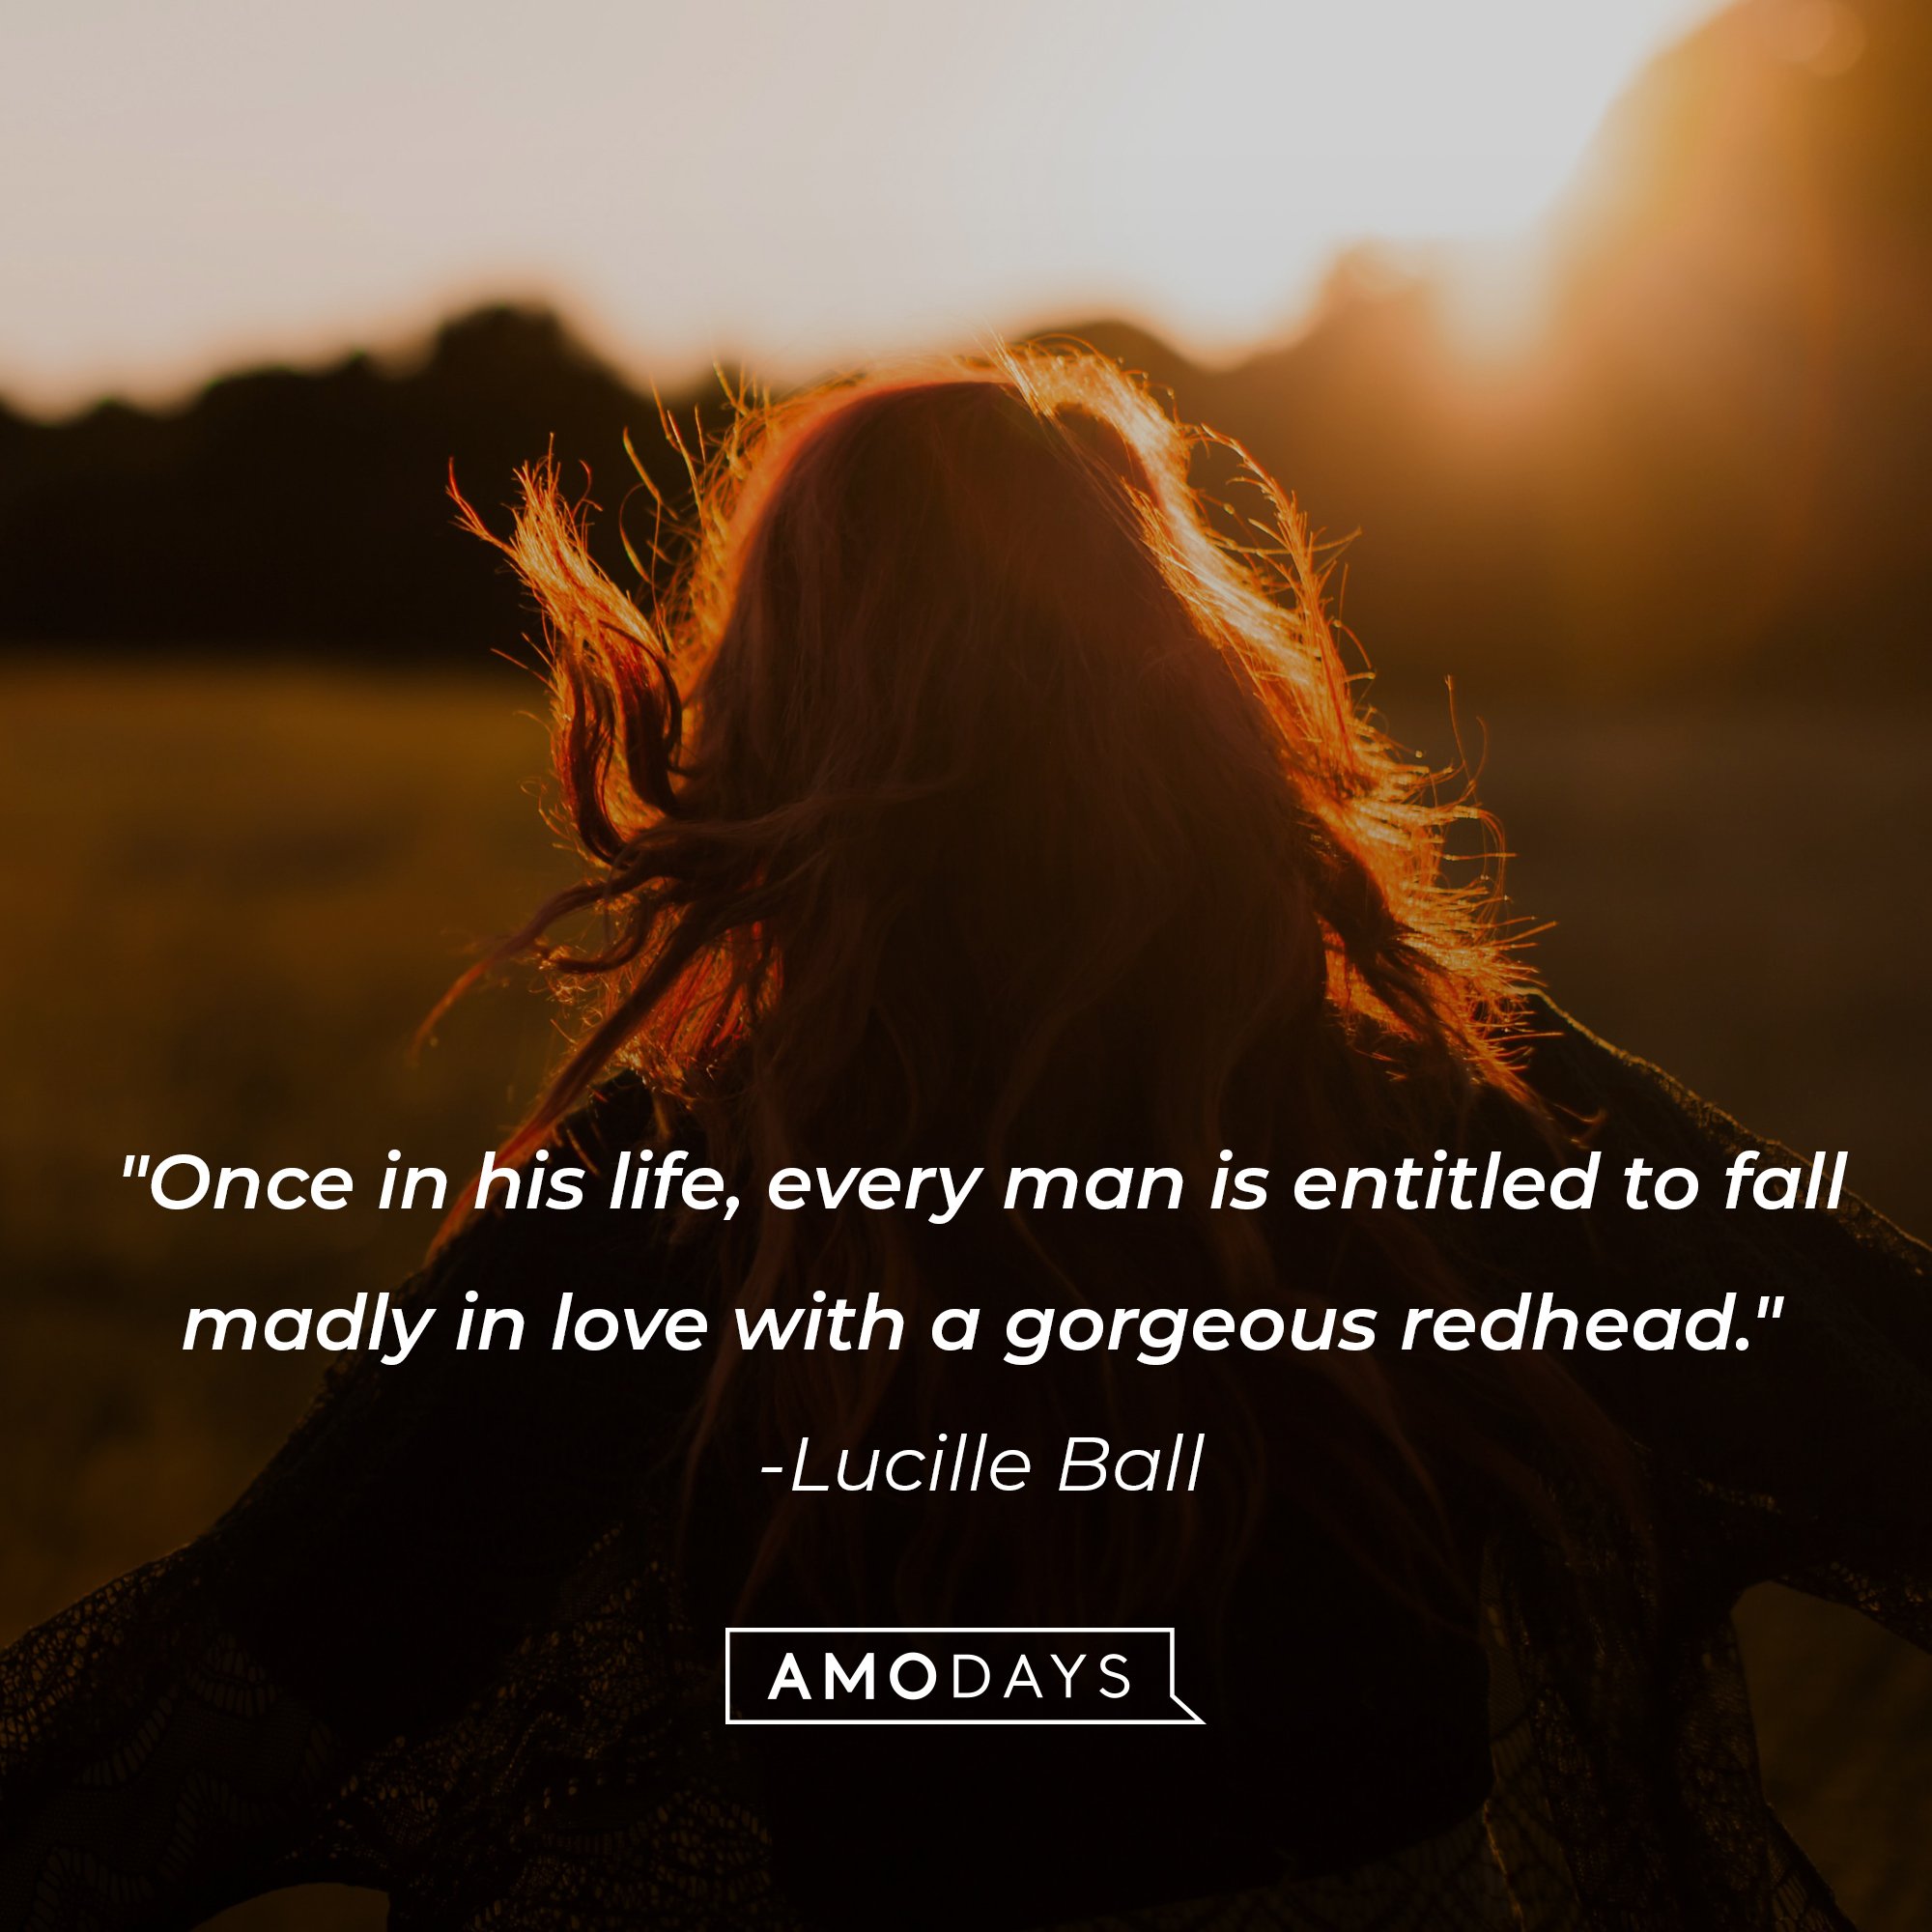 Lucille Ball’s quote: "Once in his life, every man is entitled to fall madly in love with a gorgeous redhead." | Image: AmoDays 